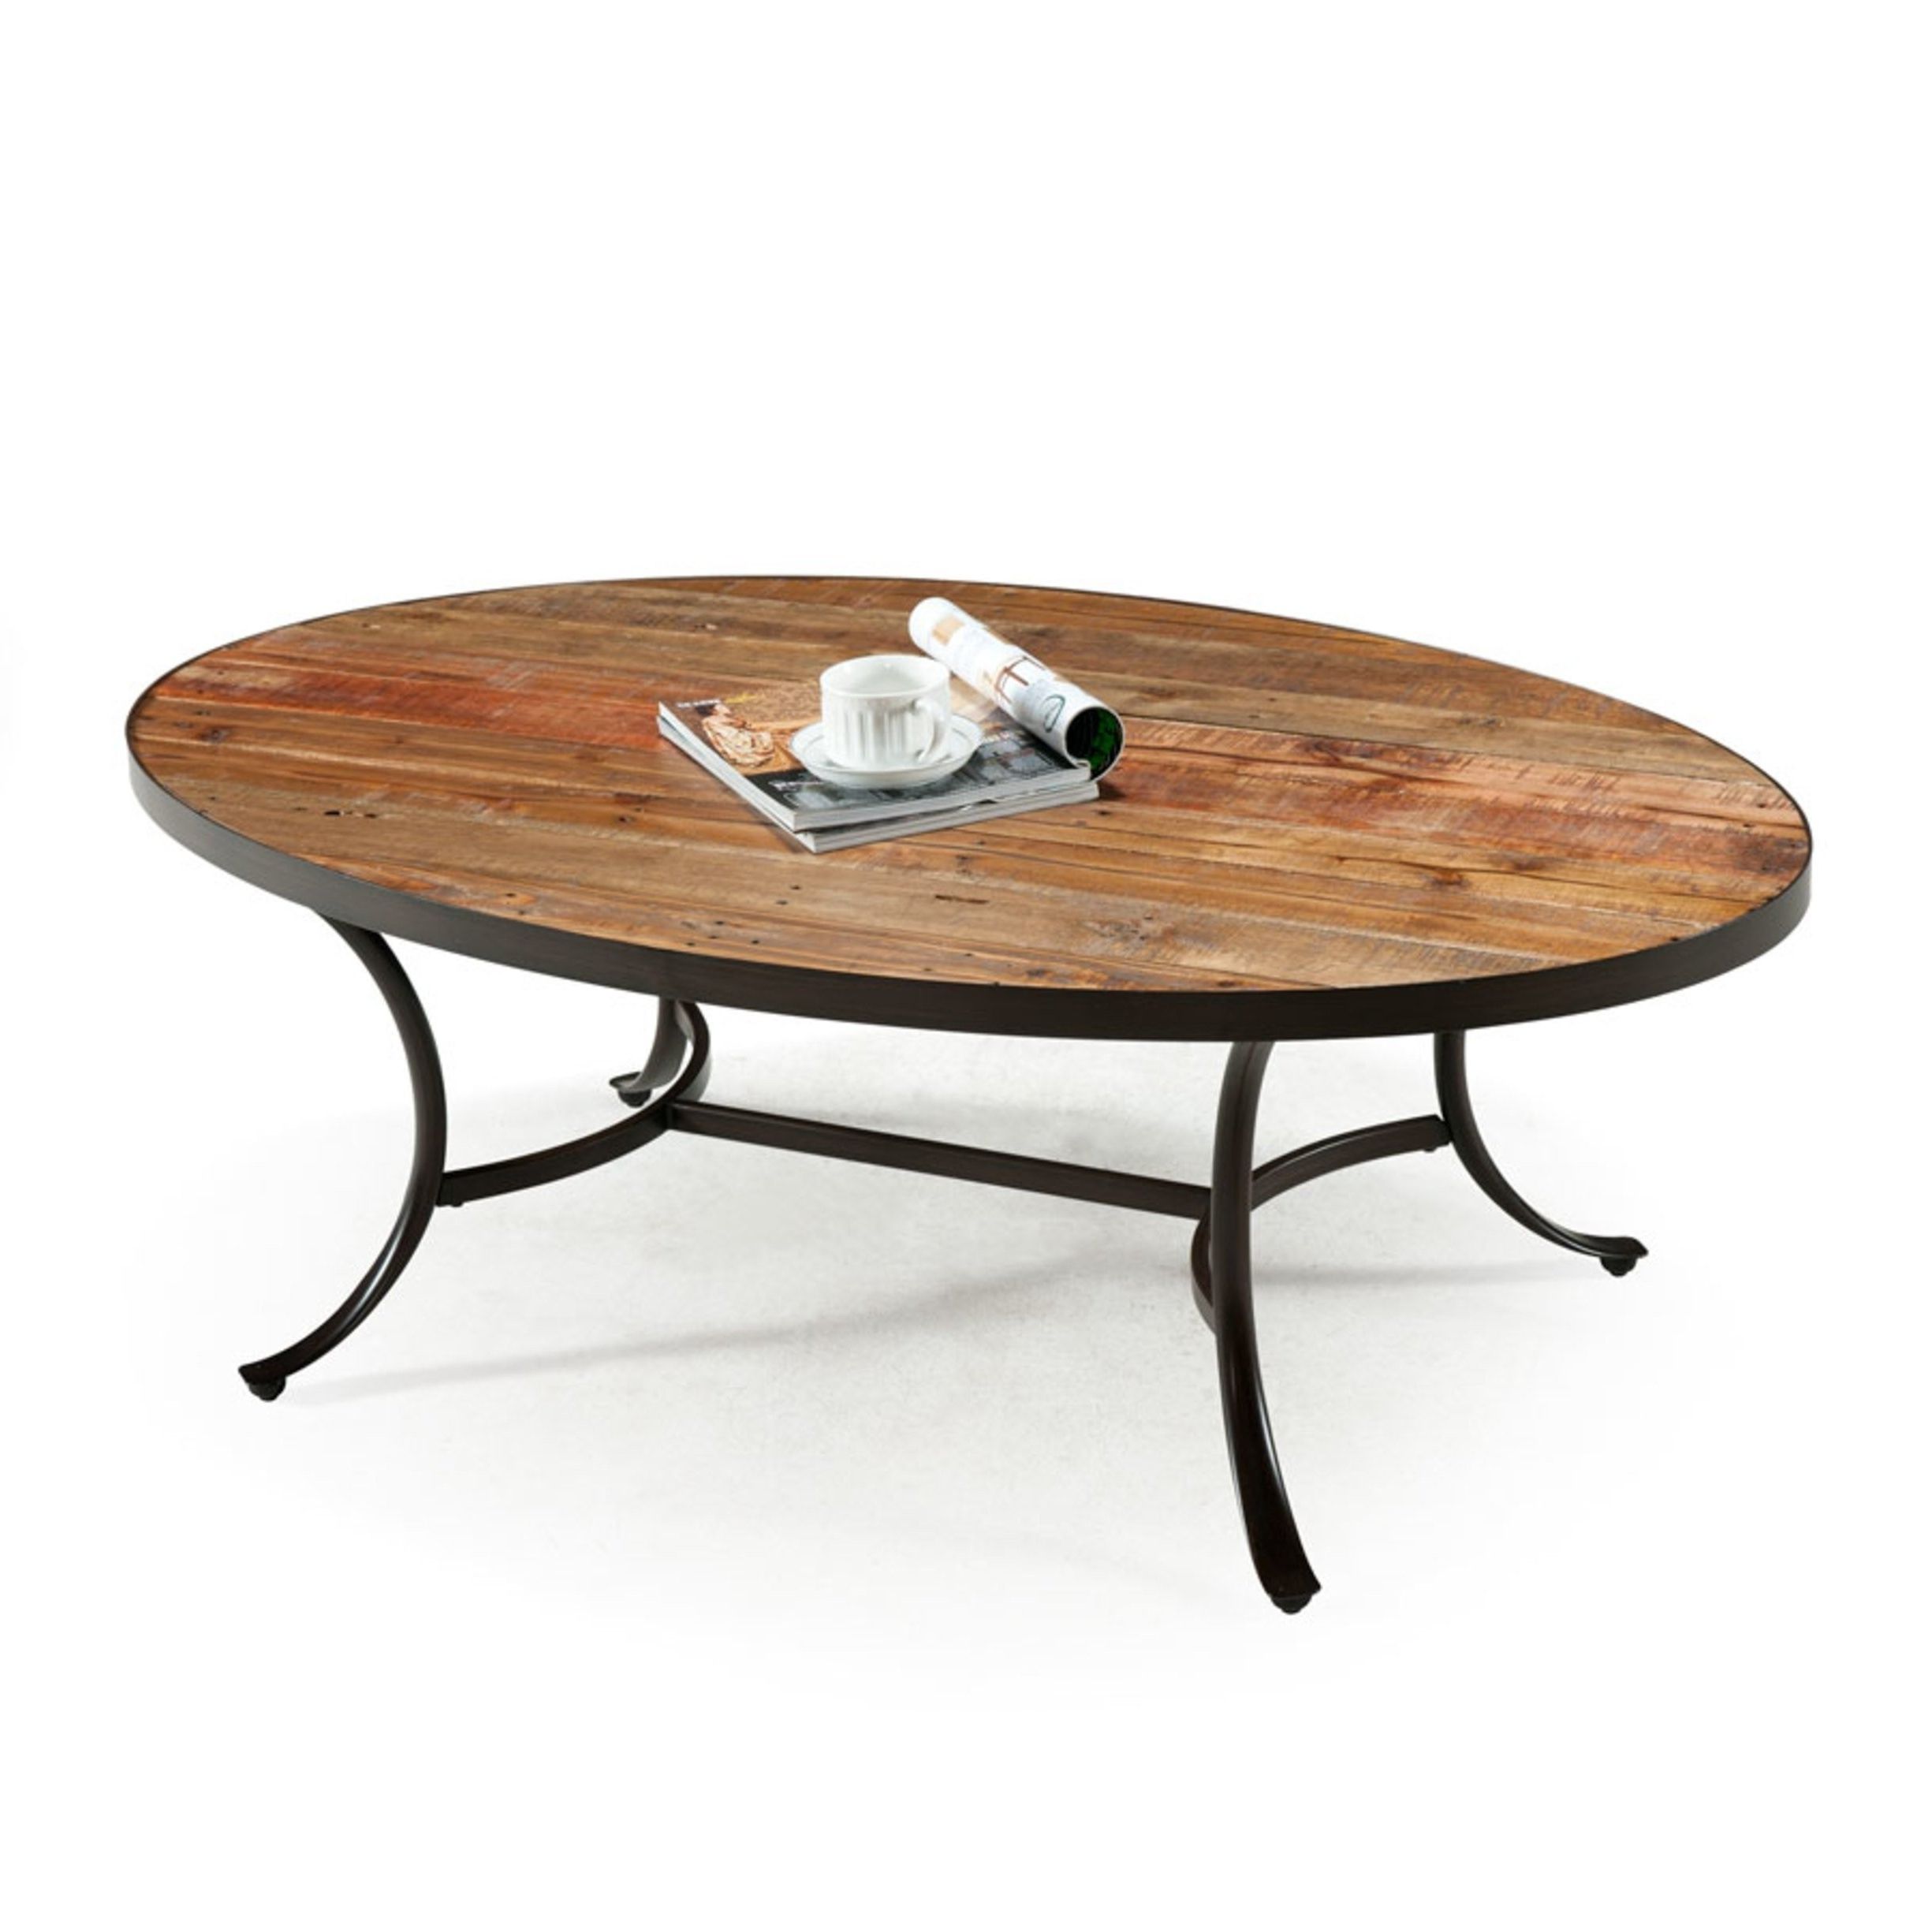 Most Recent Iron Coffee Tables Inside Wood And Wrought Iron Coffee Table – Ideas On Foter (Gallery 20 of 20)